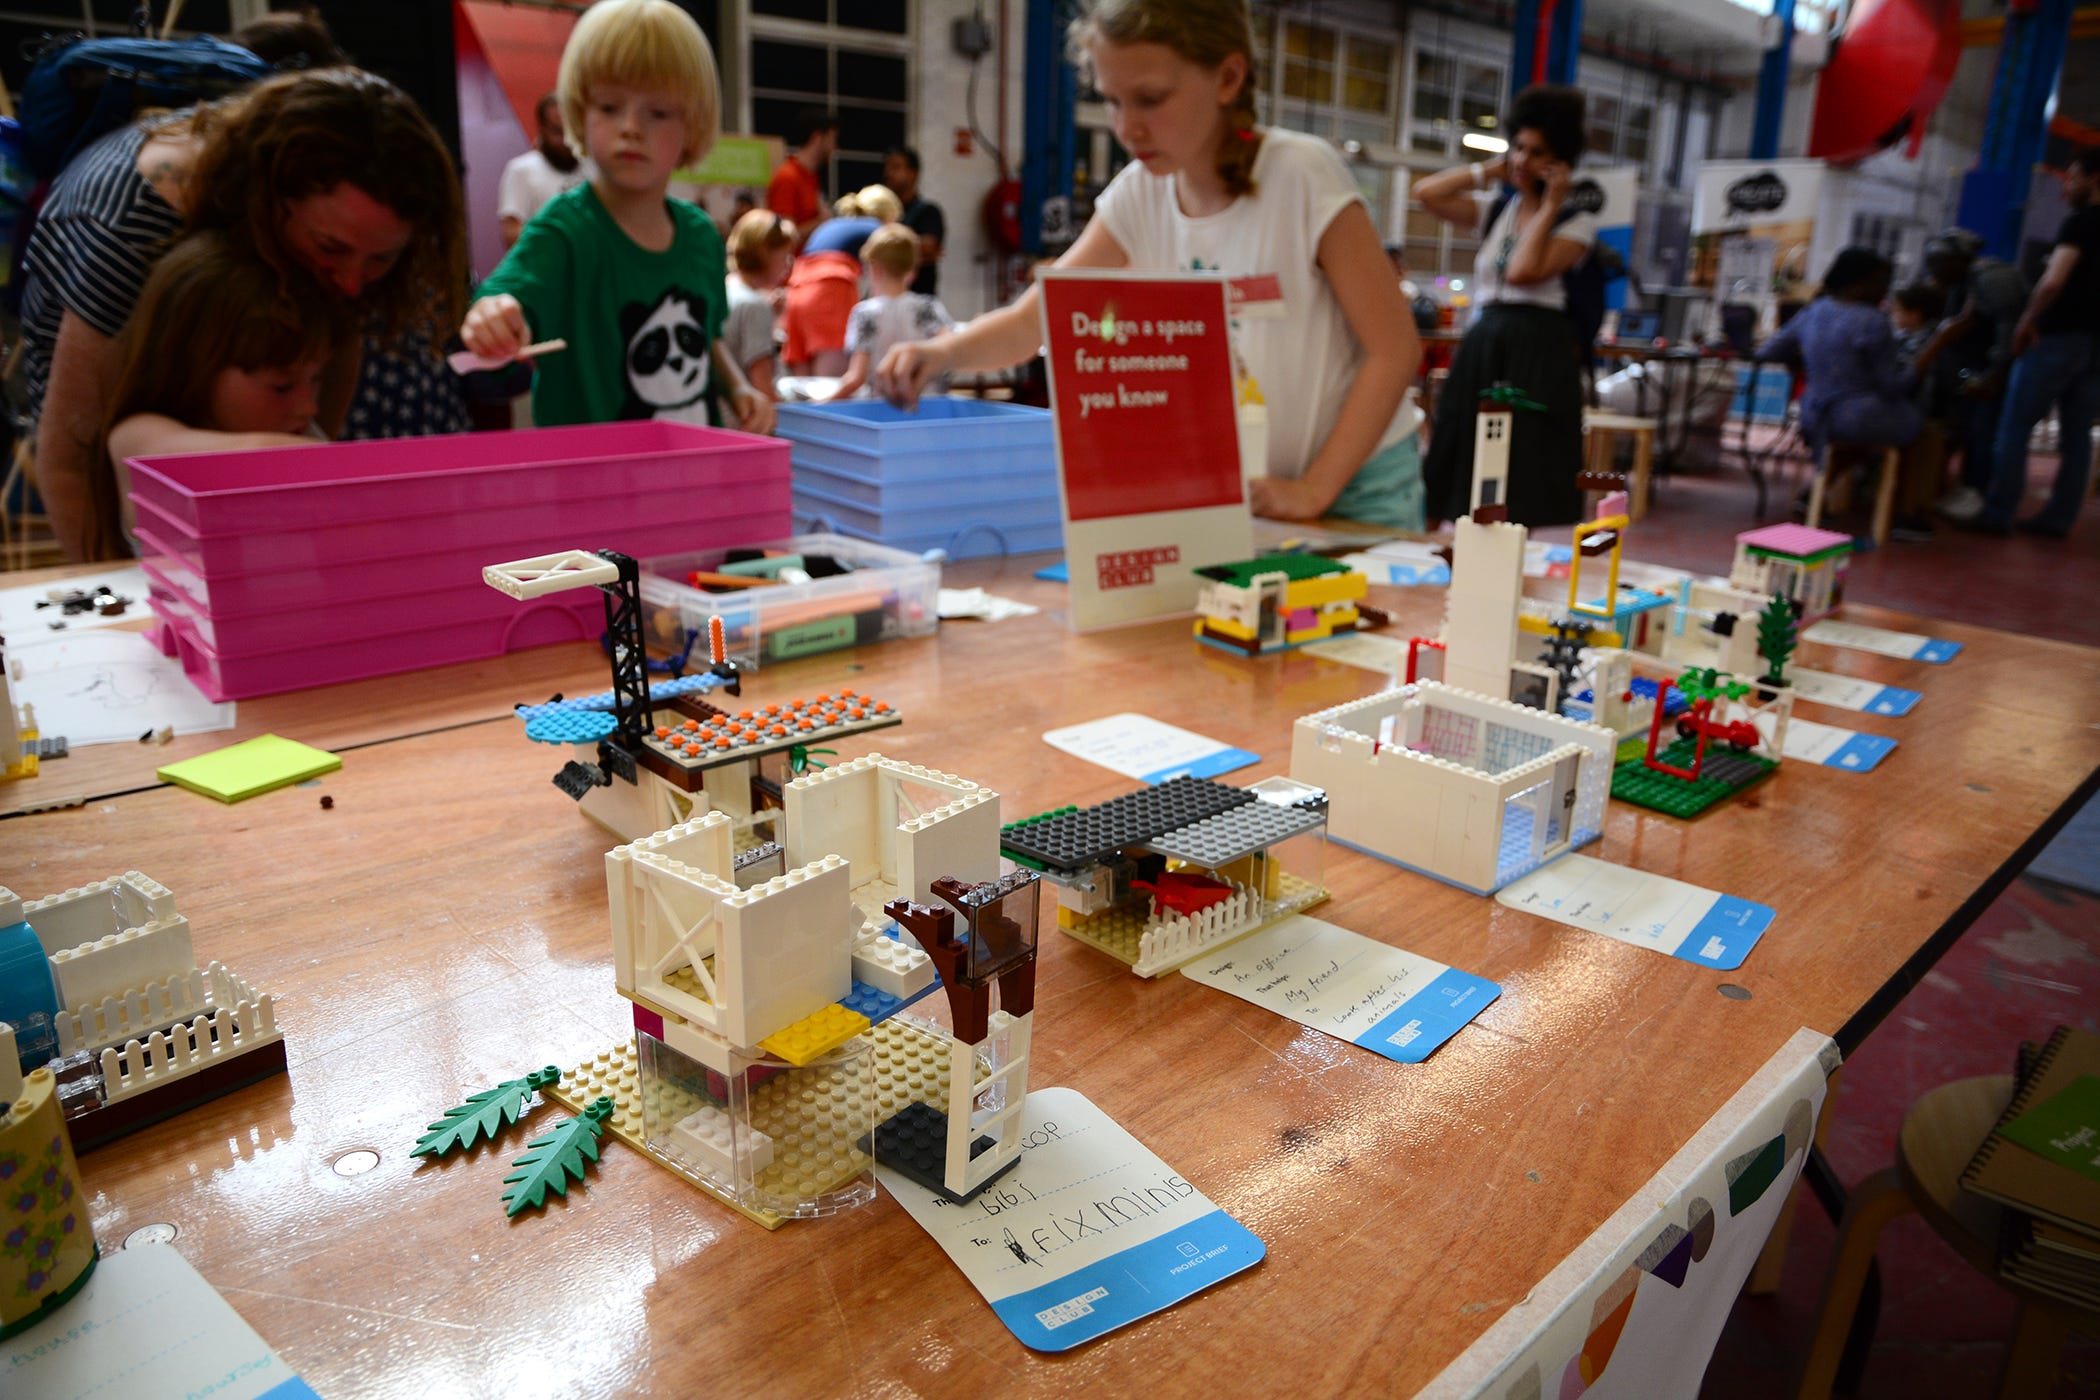 Mixing Lego with Design Thinking to help children build user-centred spaces  | by Noam | Design Club | Medium